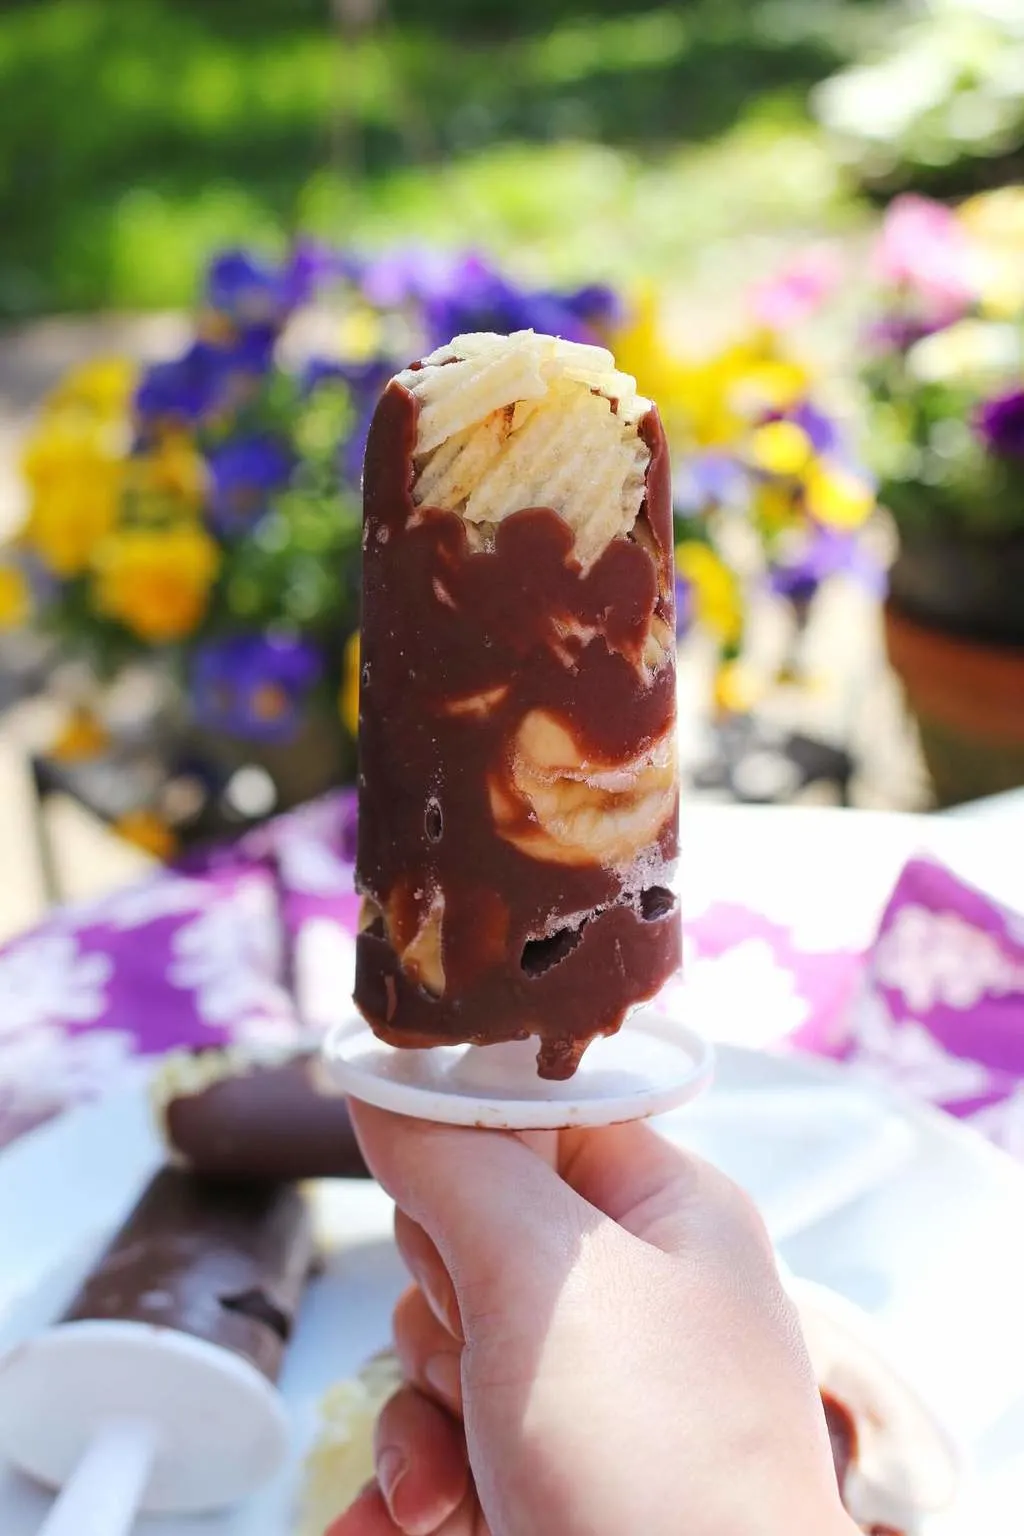 These Ruffles chocolate banana frozen pops are the perfect combination of salty and sweet! Add them to your summer backyard party menu!